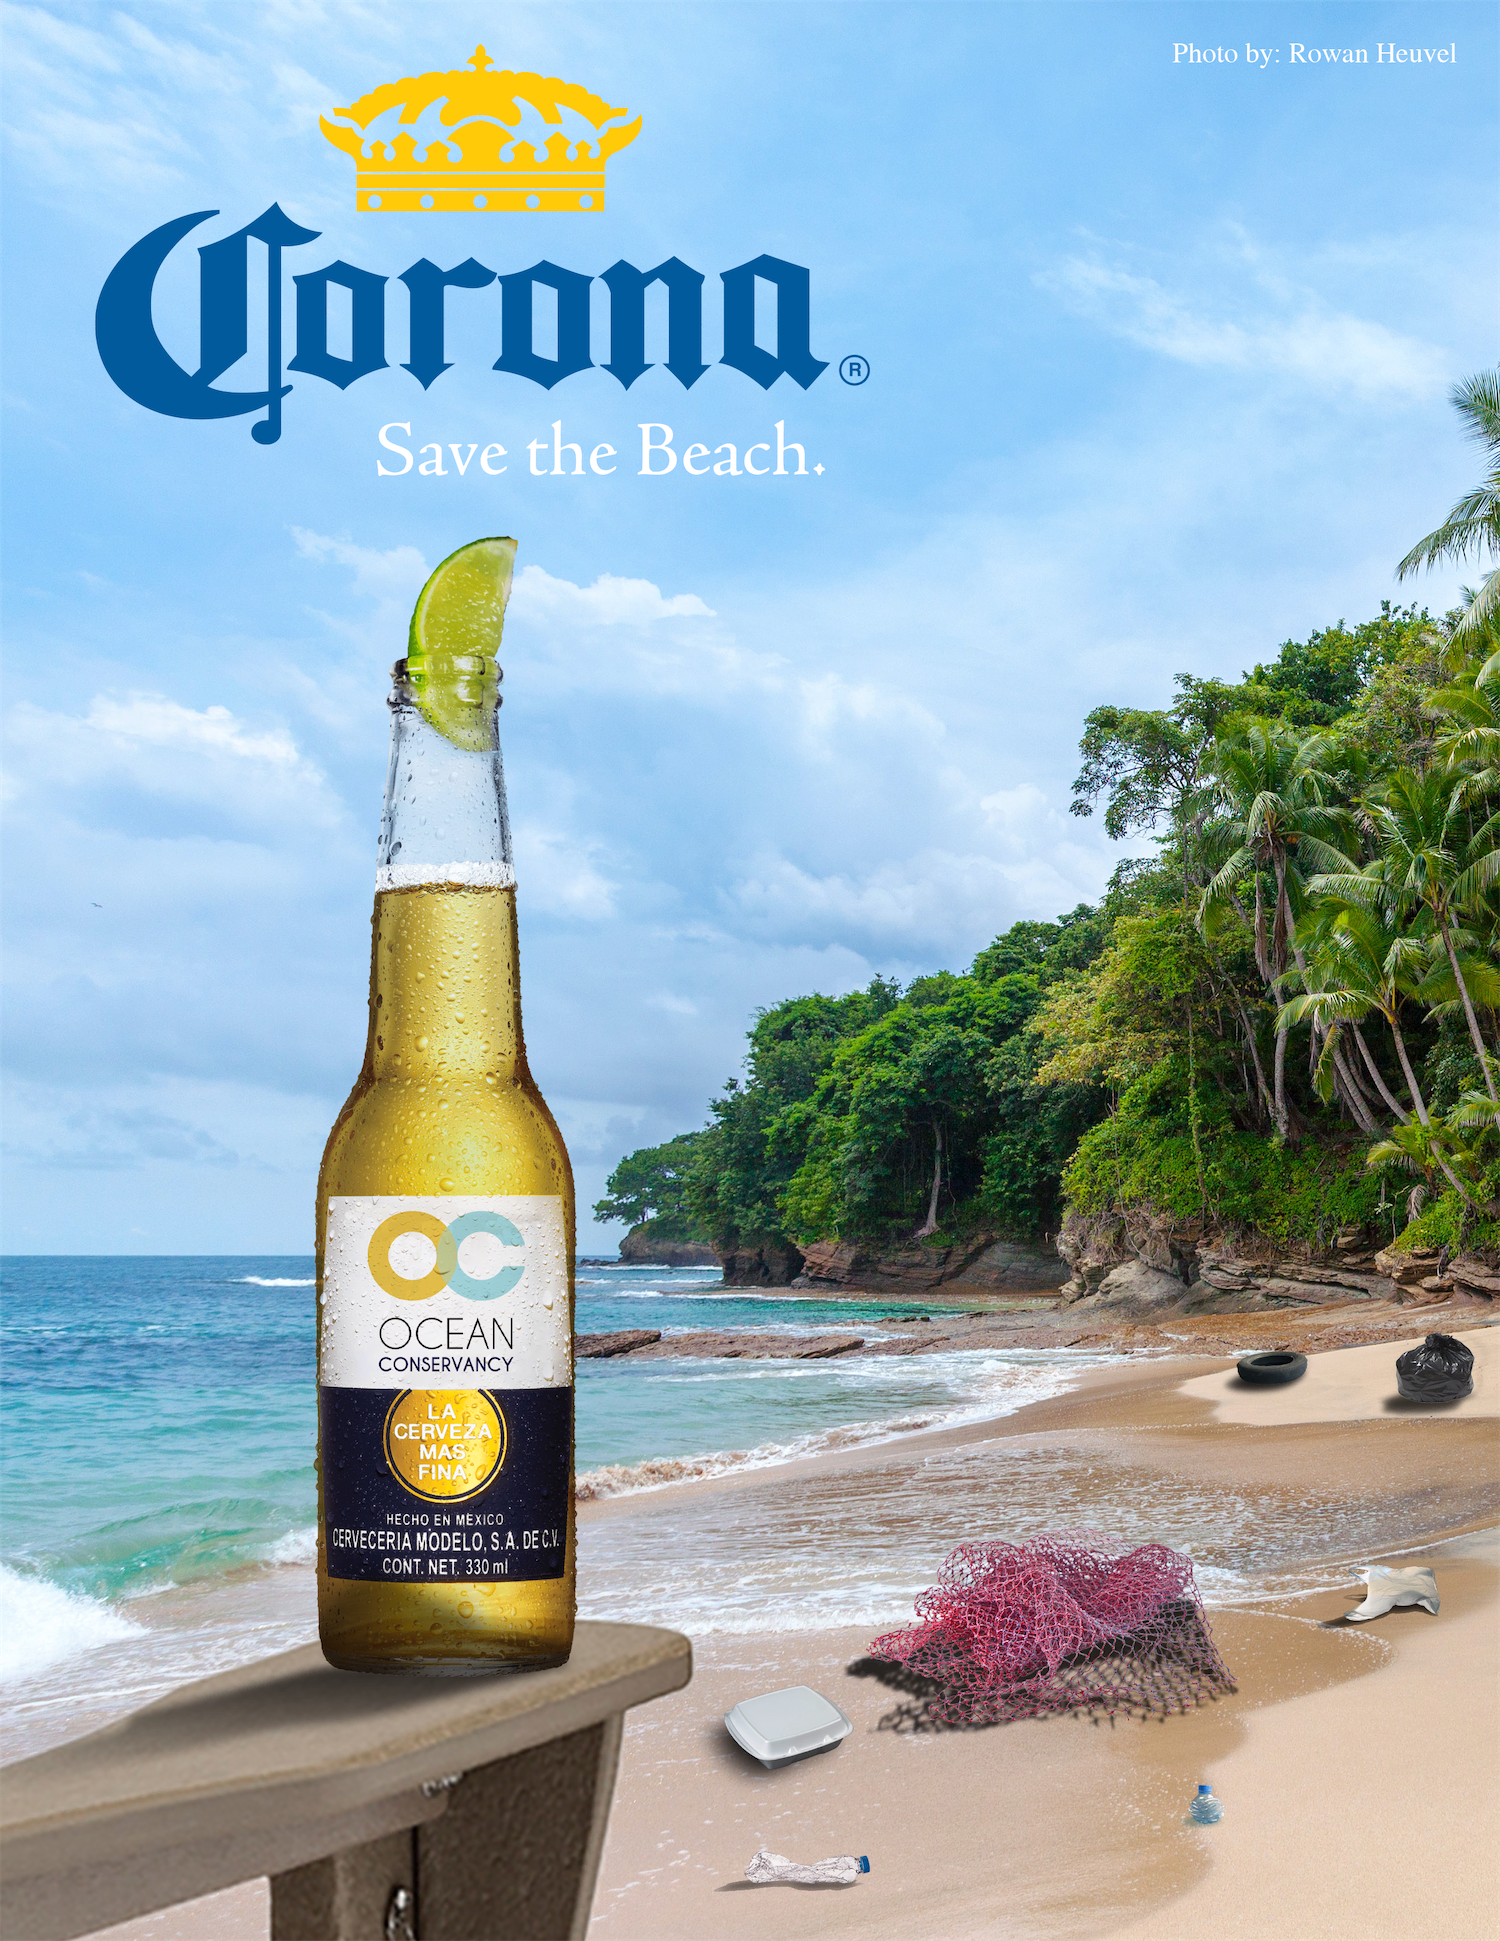 A Corona Extra full-page magazine advertisement that has been partnered with Ocean Conservancy. It is a bottle on the arm of an Adirondack chair overlooking a beach covered in ocean trash and plastic waste.